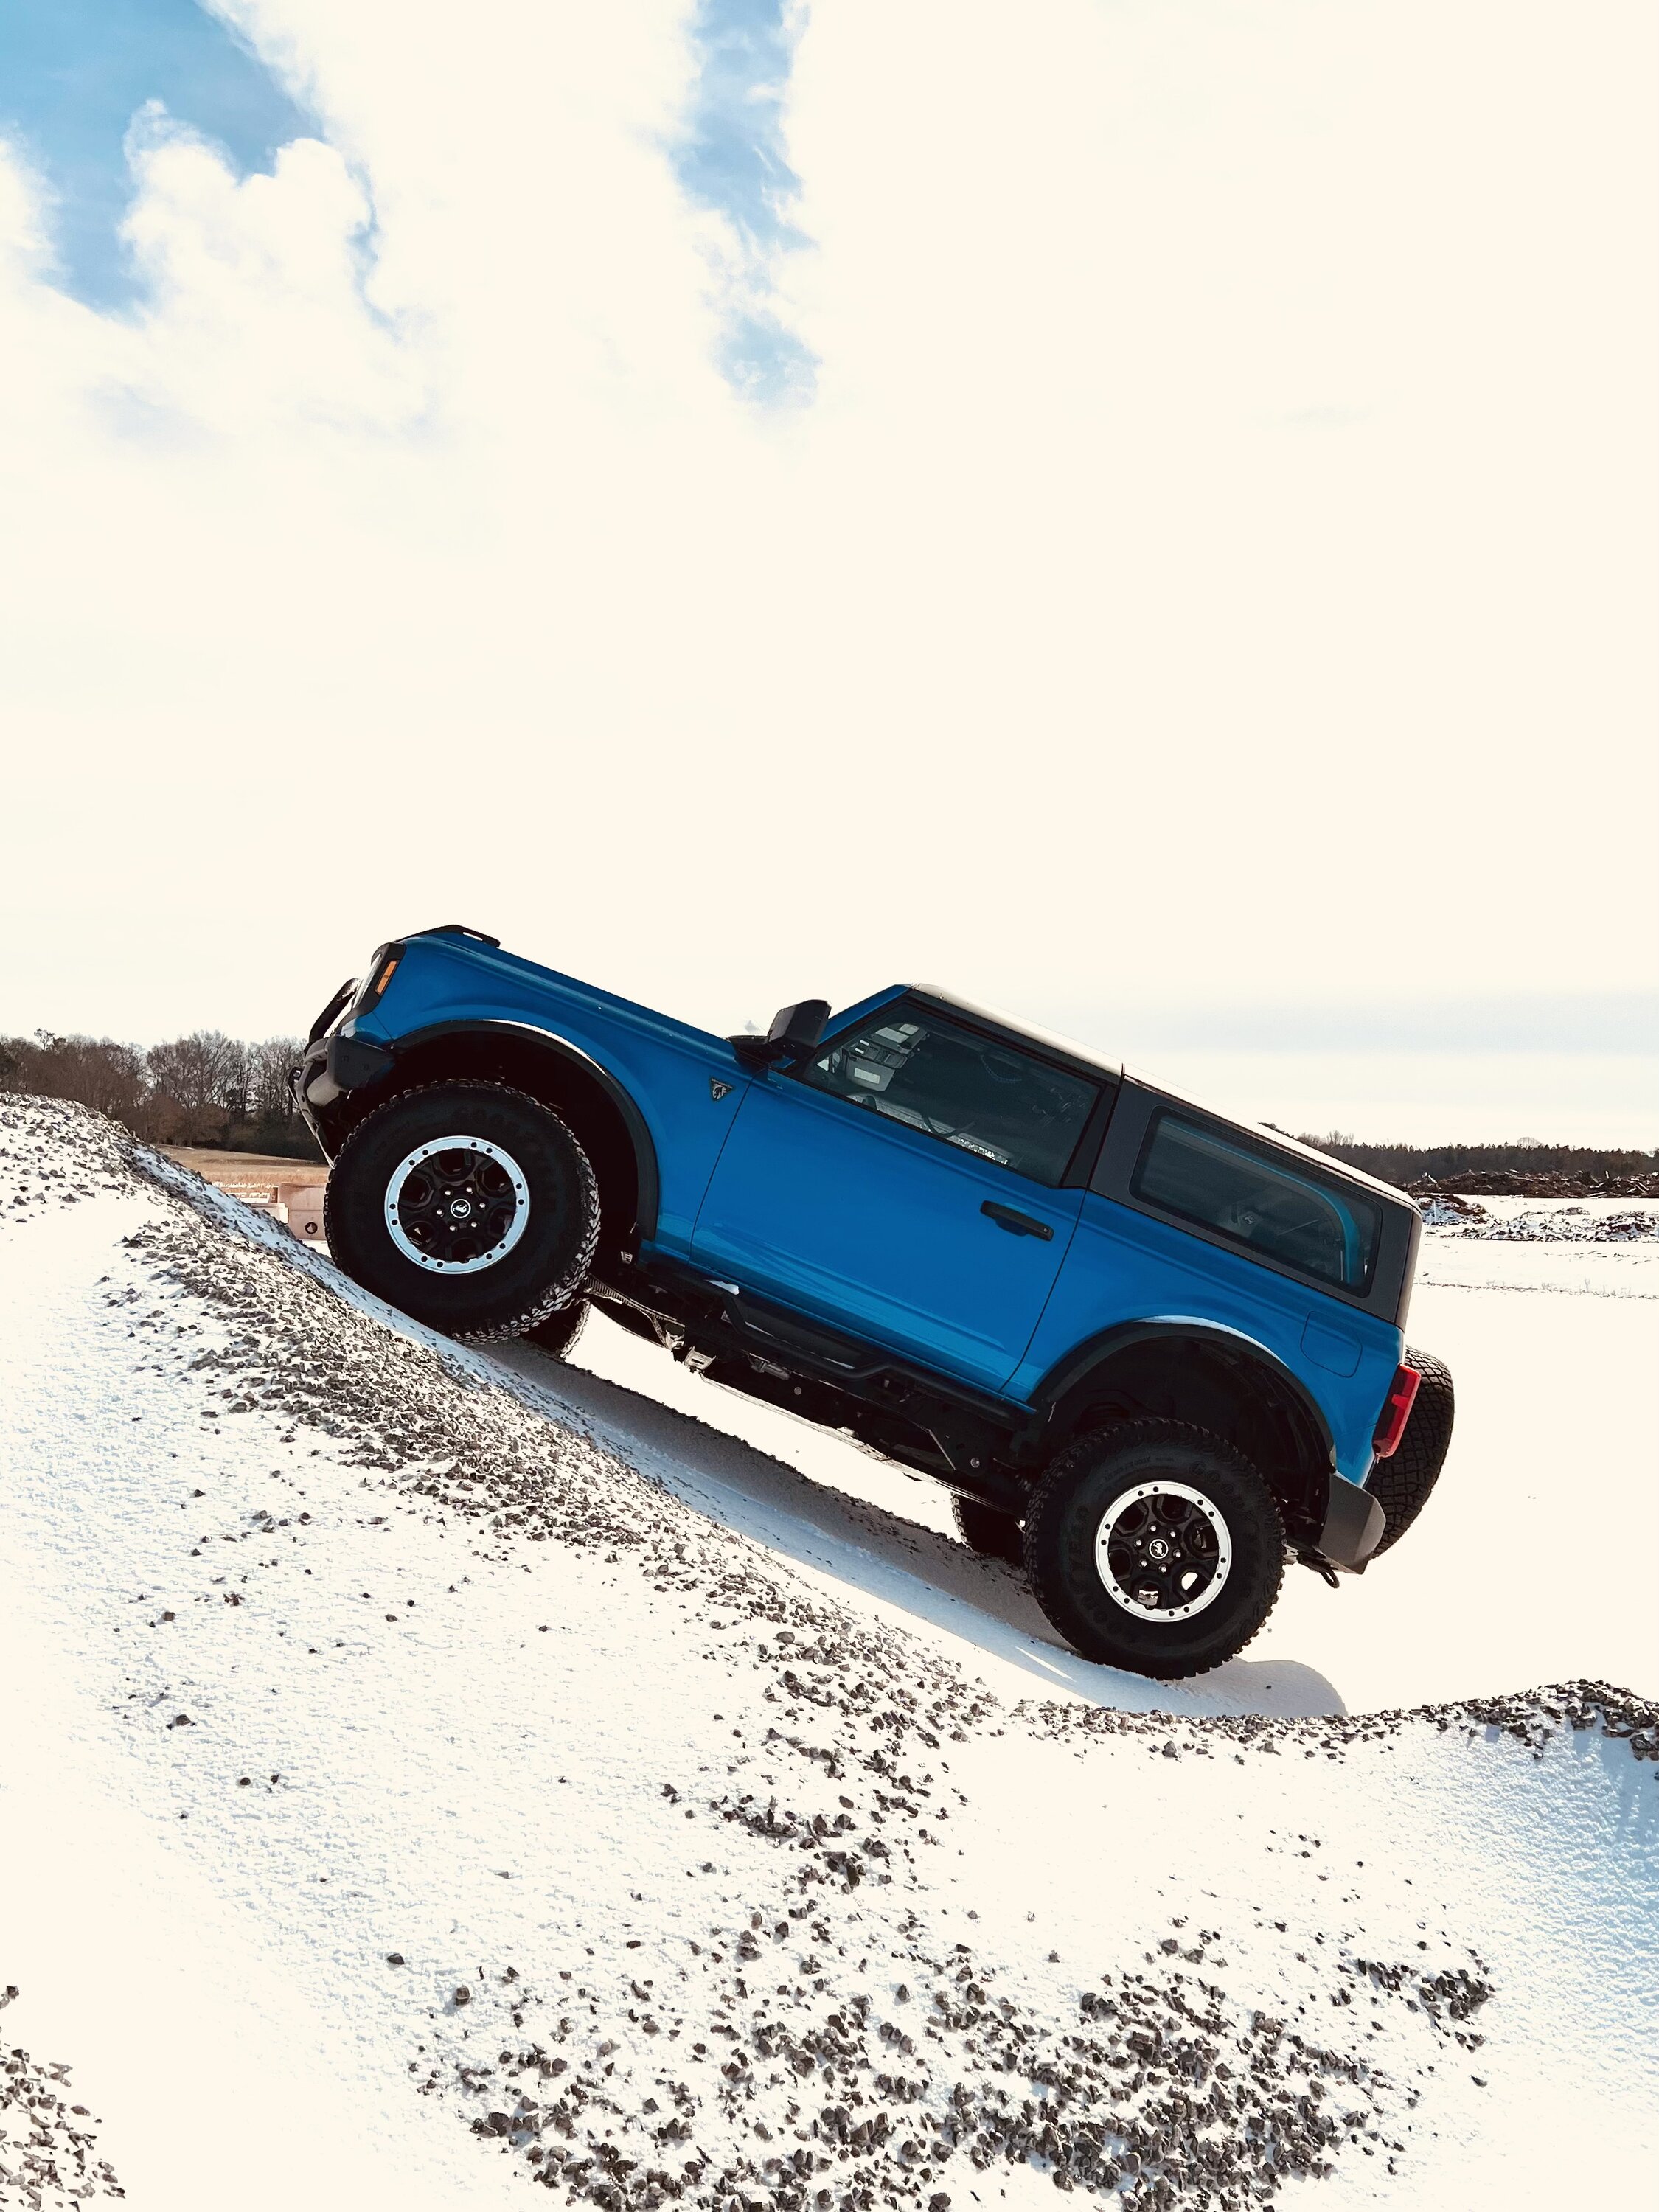 Ford Bronco Happy Wednesday!!! Let's see those 🥶 Ice / Sn❄w photos!!! FullSizeRender